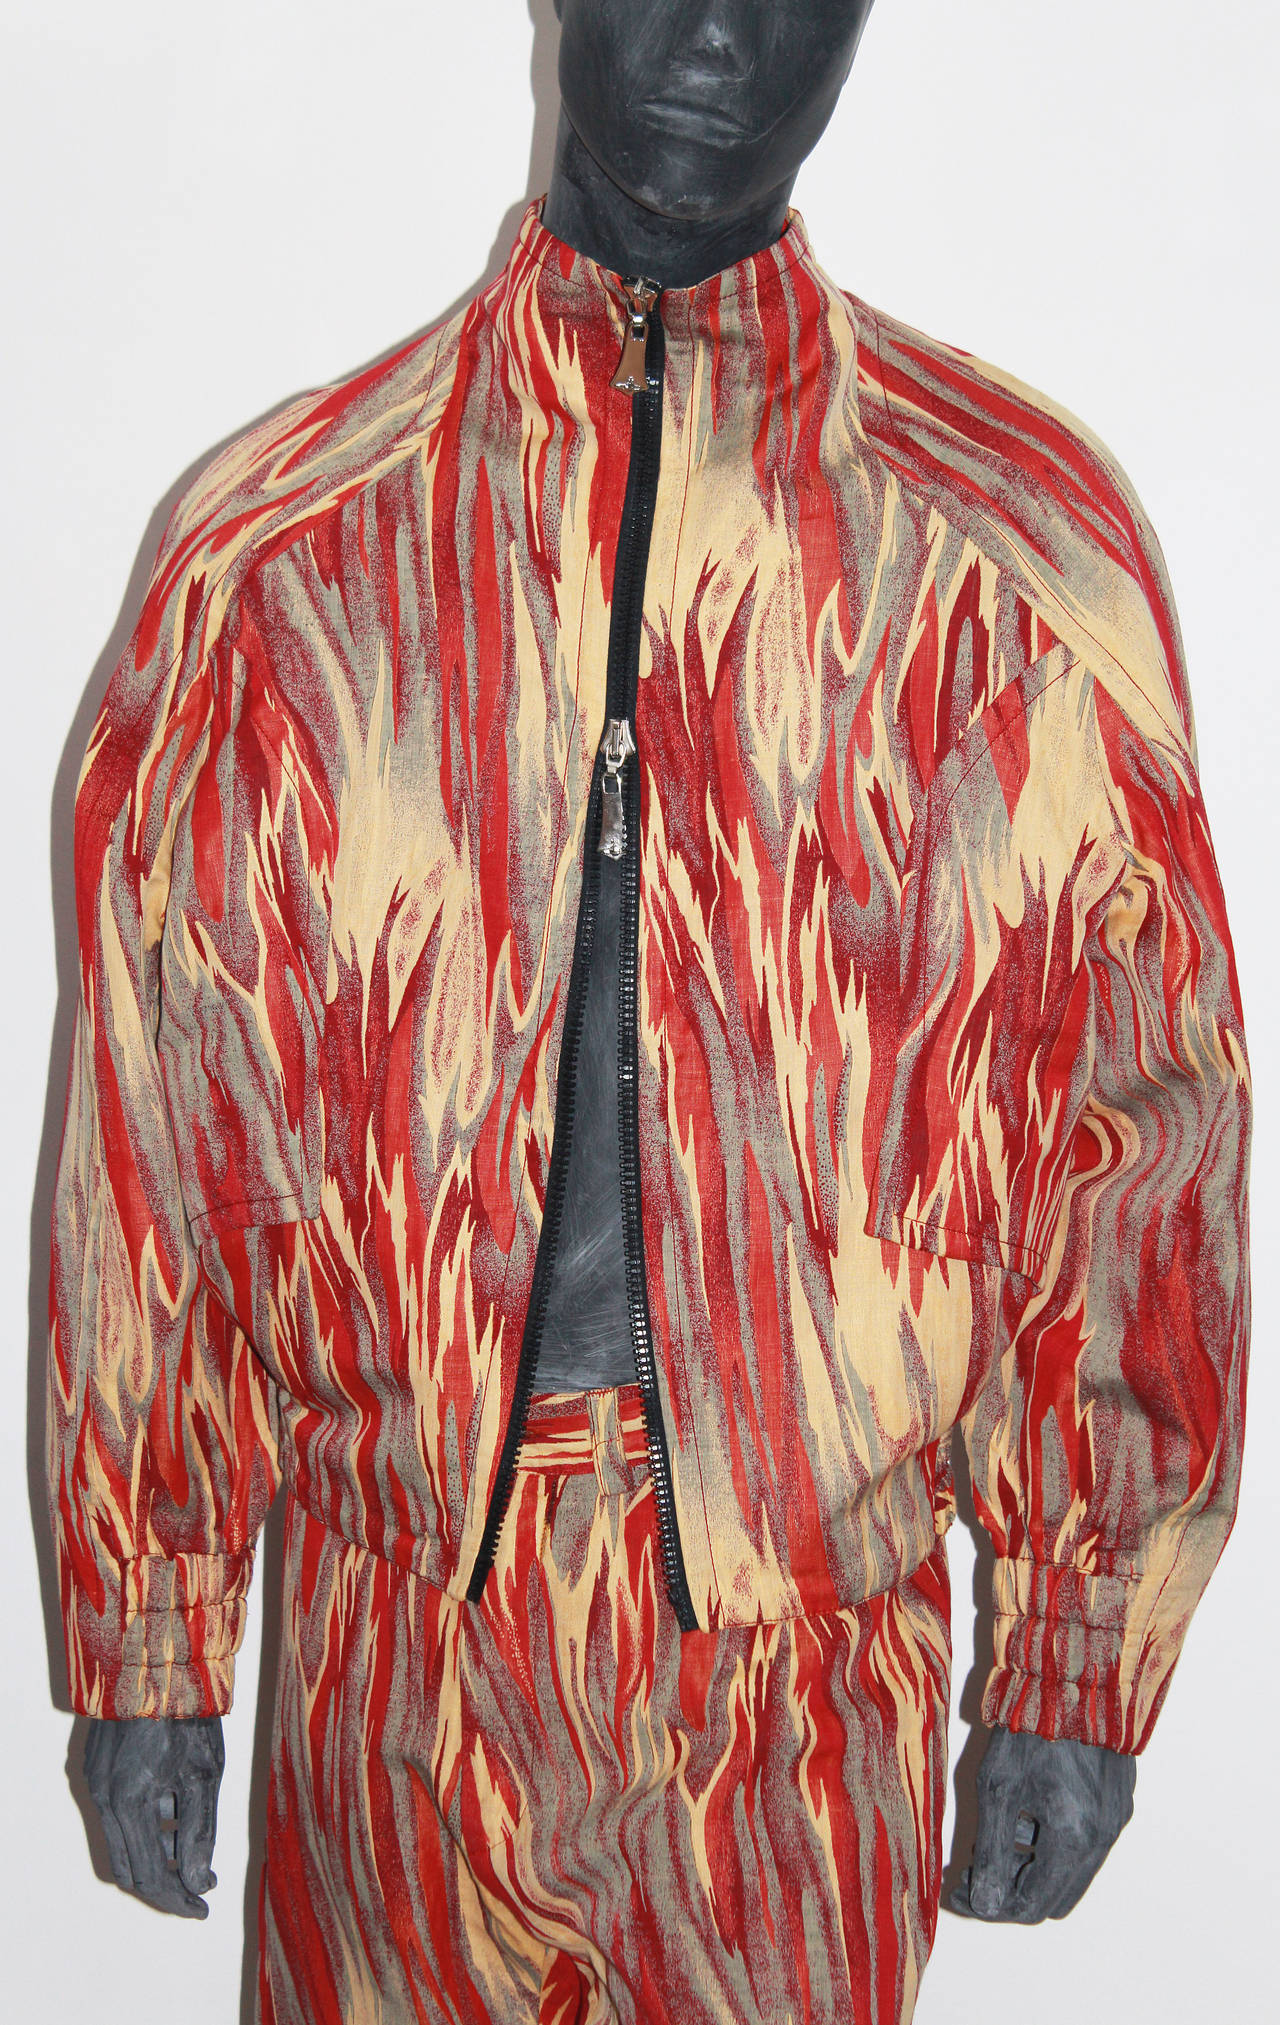 Rare 1990s Vivienne Westwood MAN Flame Print ensemble, includes sports bomber jacket and straight cut shorts.

Size It 50 

Medium